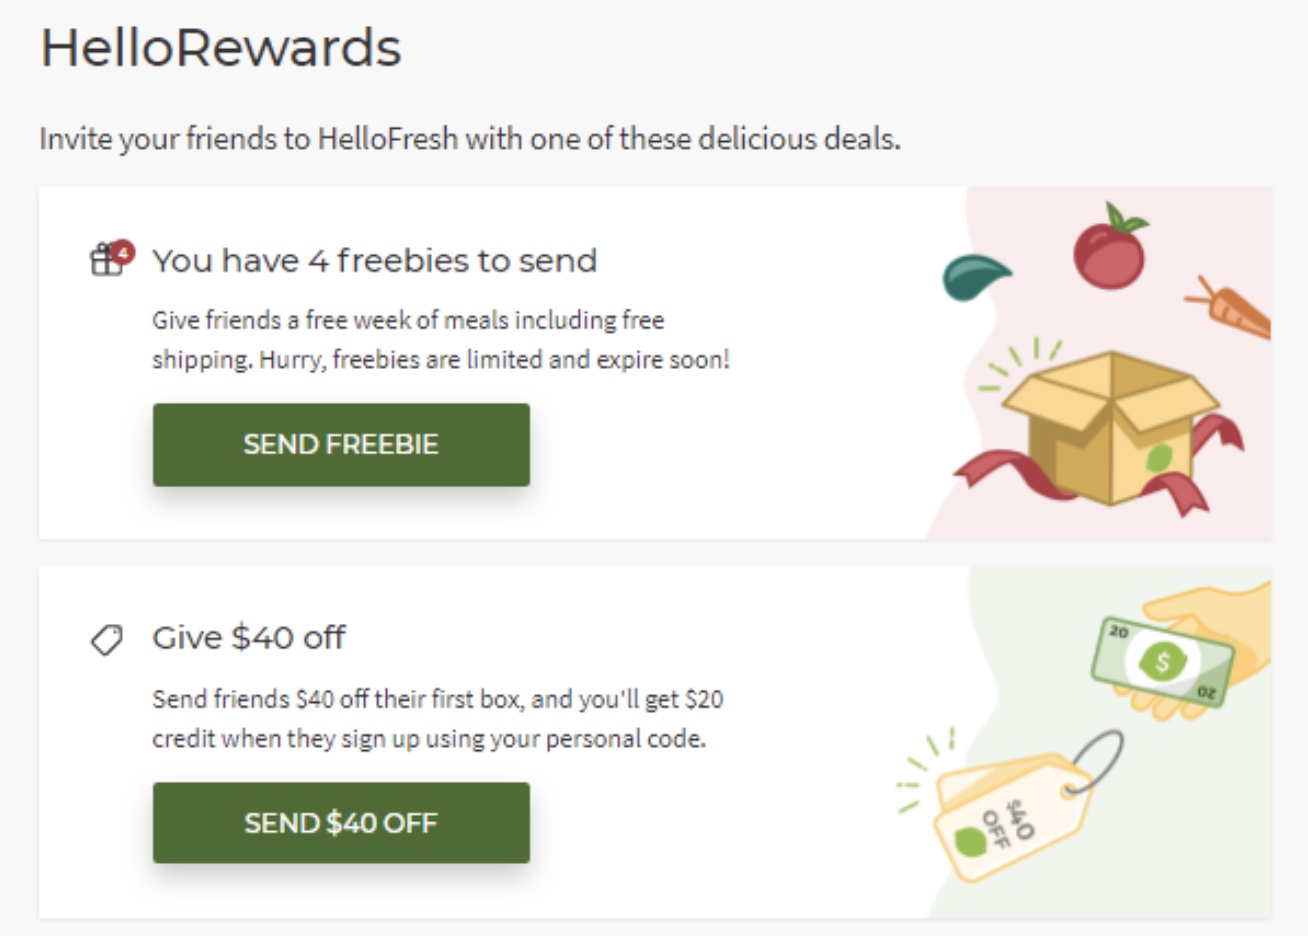 The reward program on the Hello Fresh website encouraging word-of-mouth marketing by offering referral discounts and deals.